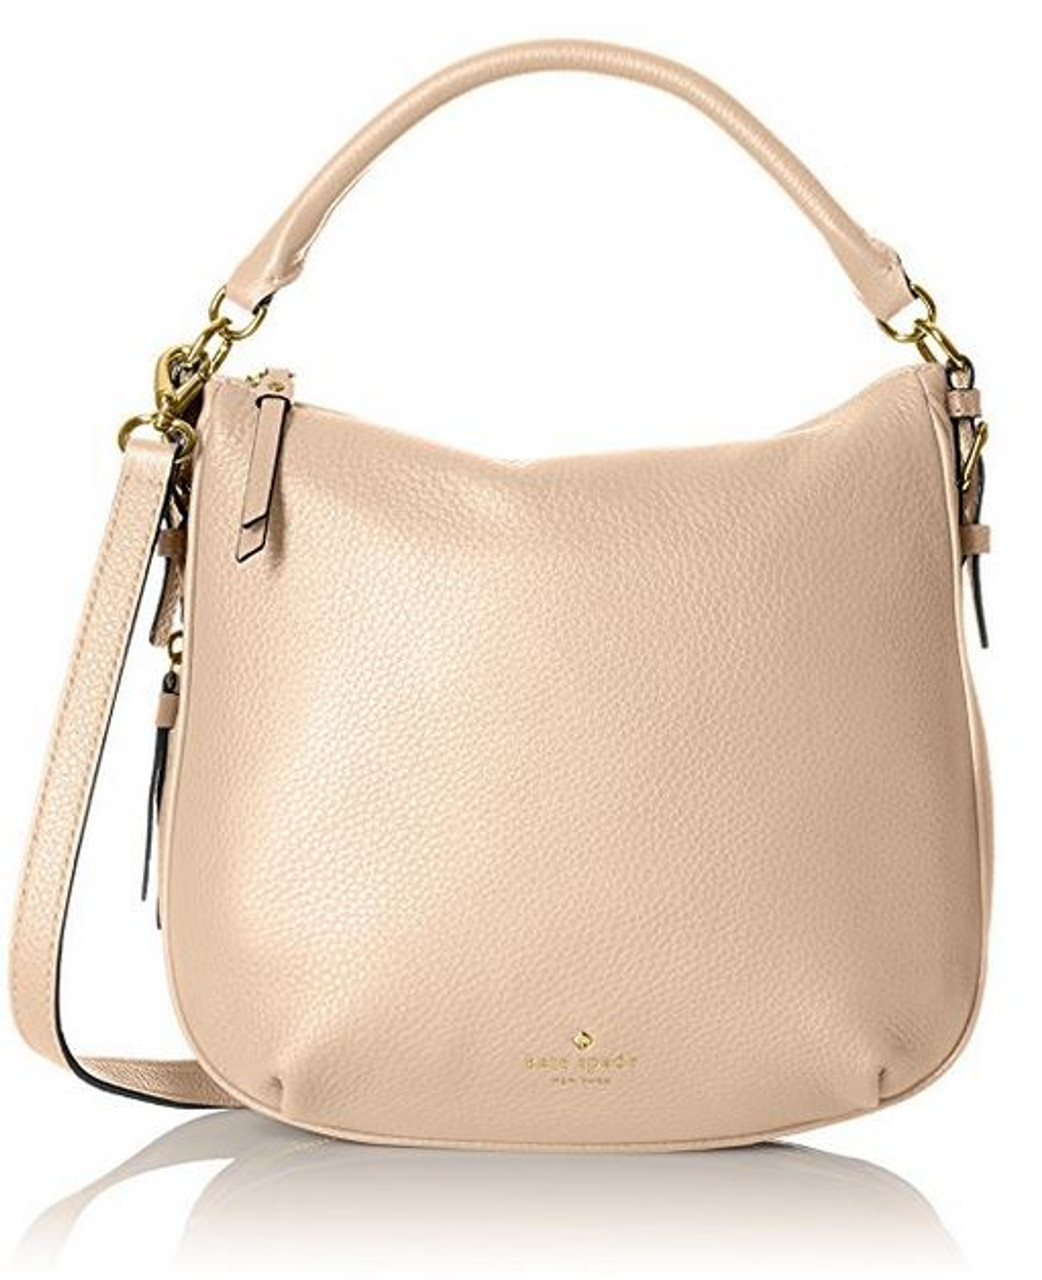 Kate Spade New York Black Leather Cobble Hill Small Ella Crossbody Bag, Best Price and Reviews